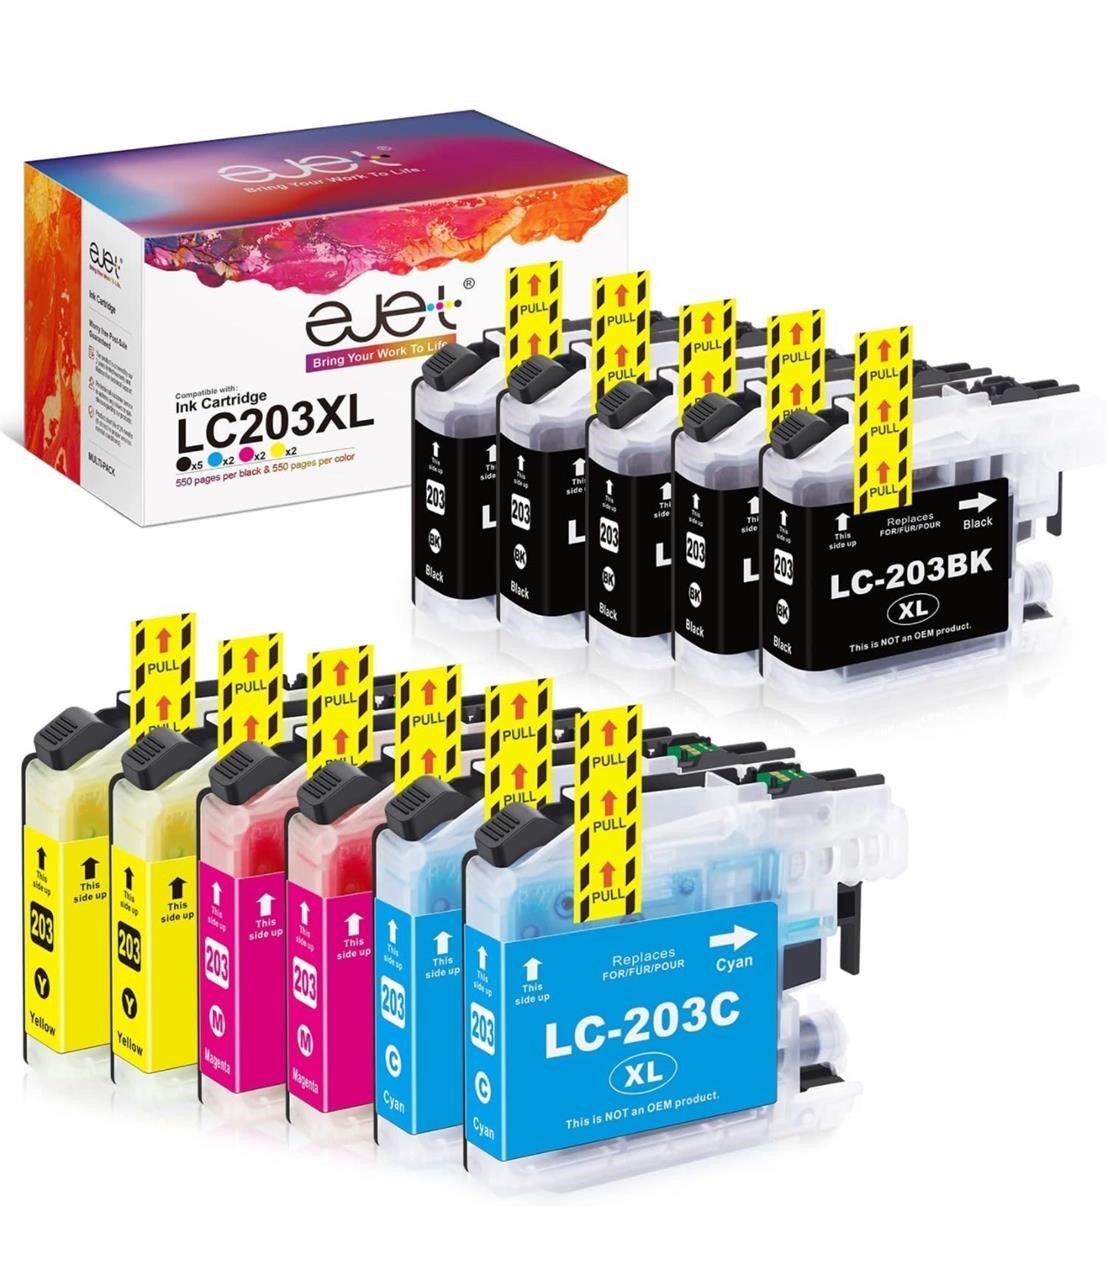 ($48) LC201 LC203 ejet Compatible Ink Cartridge